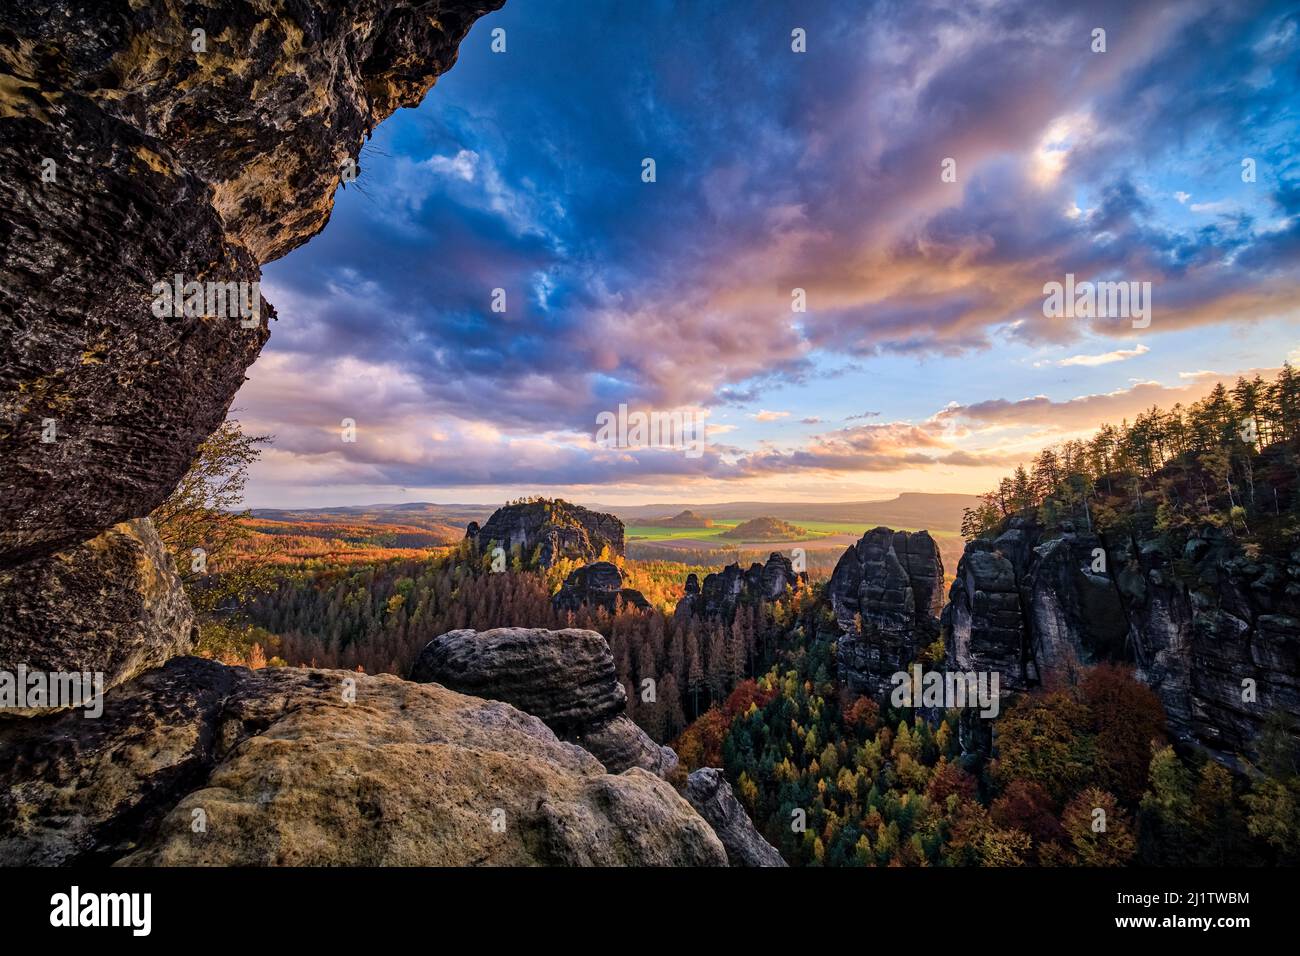 Landscape with rock formations, colorful trees and the summit Rauschenstein in Schmilka area of the Saxon Switzerland National Park in autumn. Stock Photo